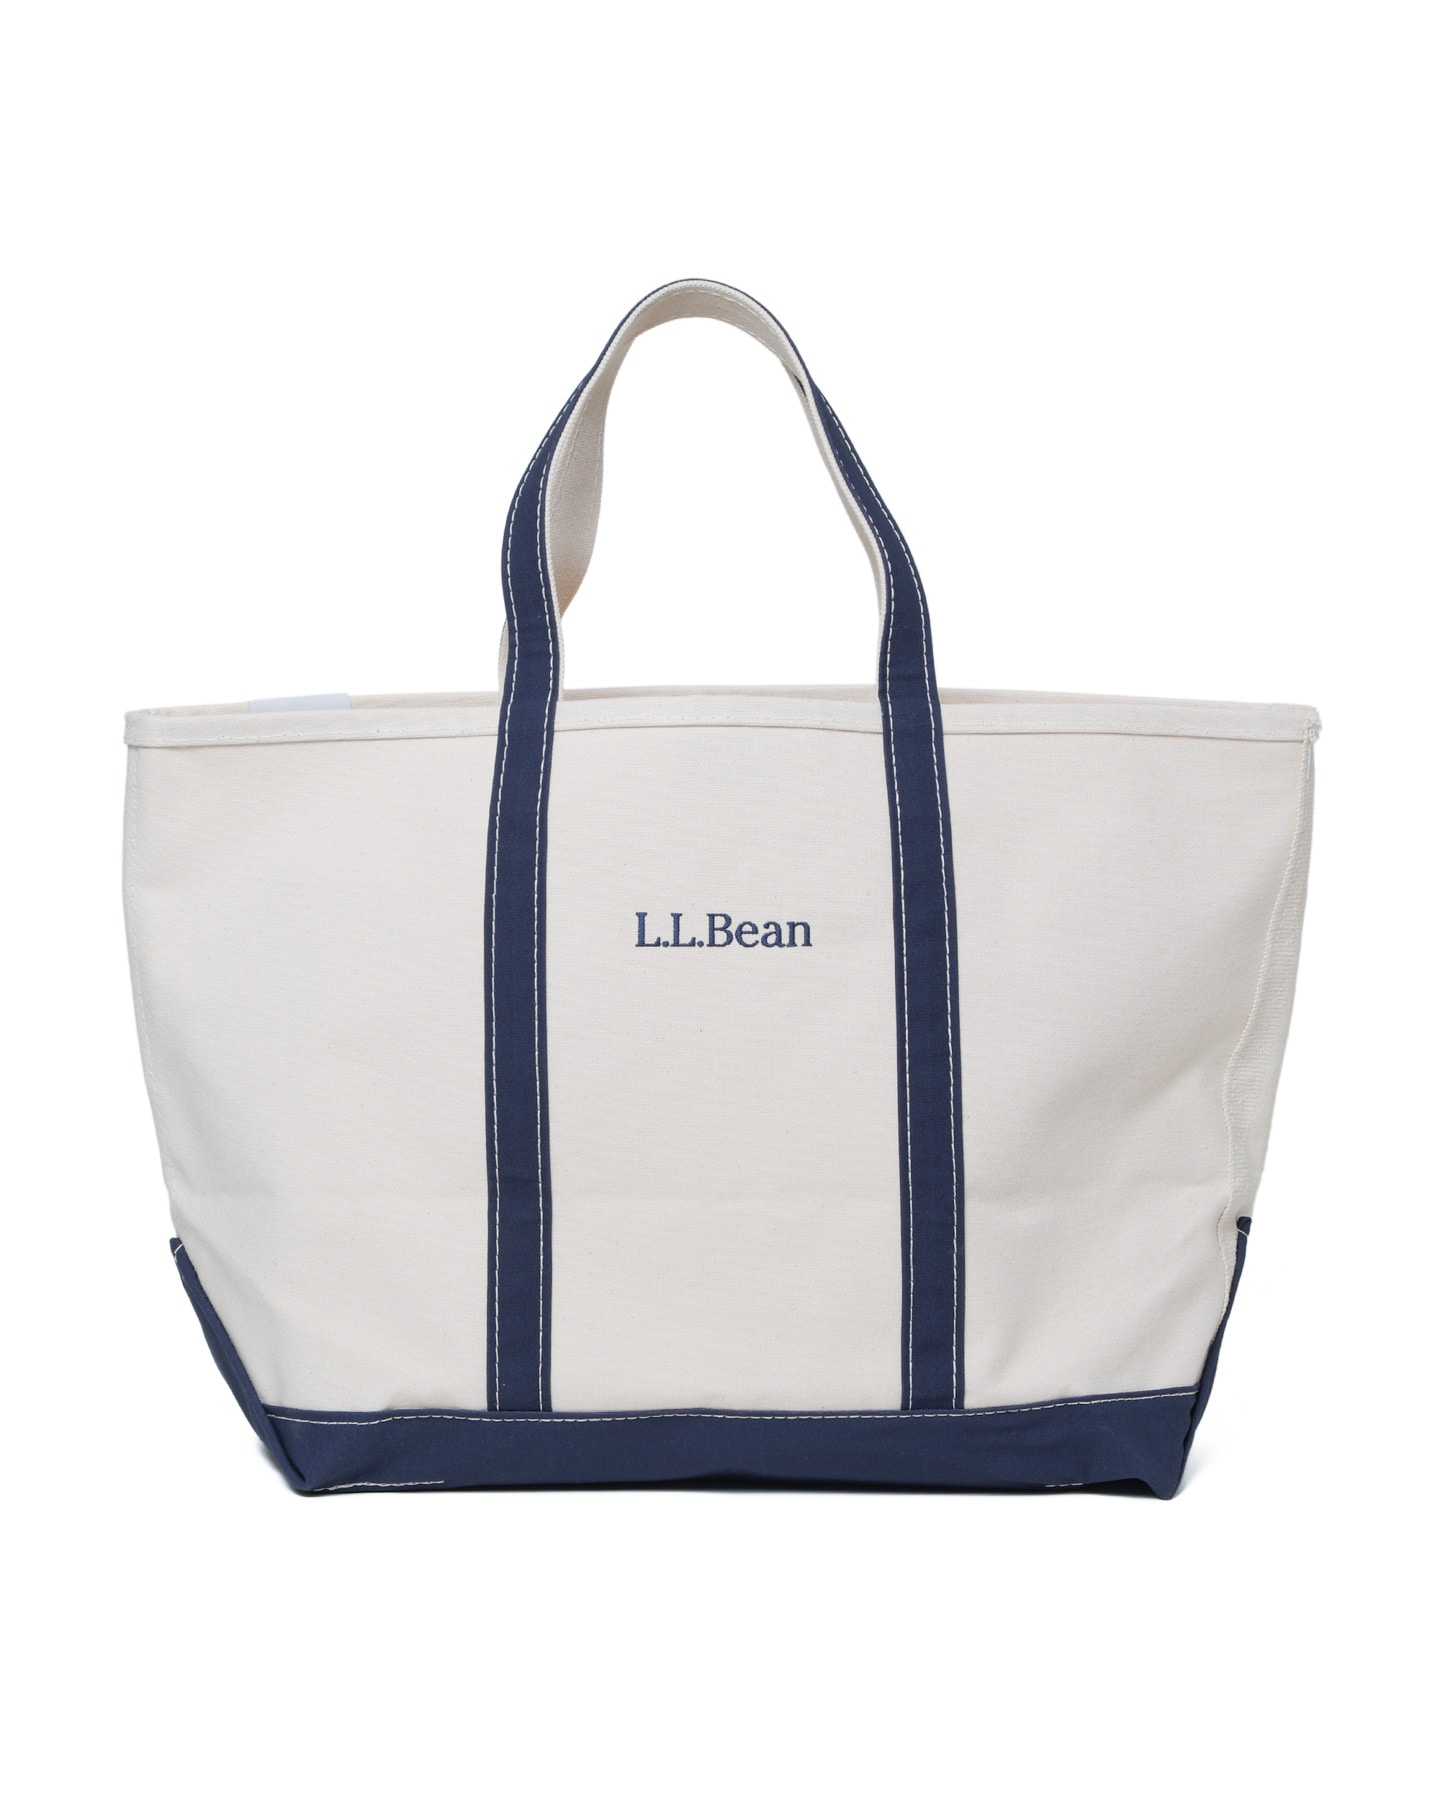 unifoSOPH. L.L.Bean BOAT AND TOTE OPEN-TOP